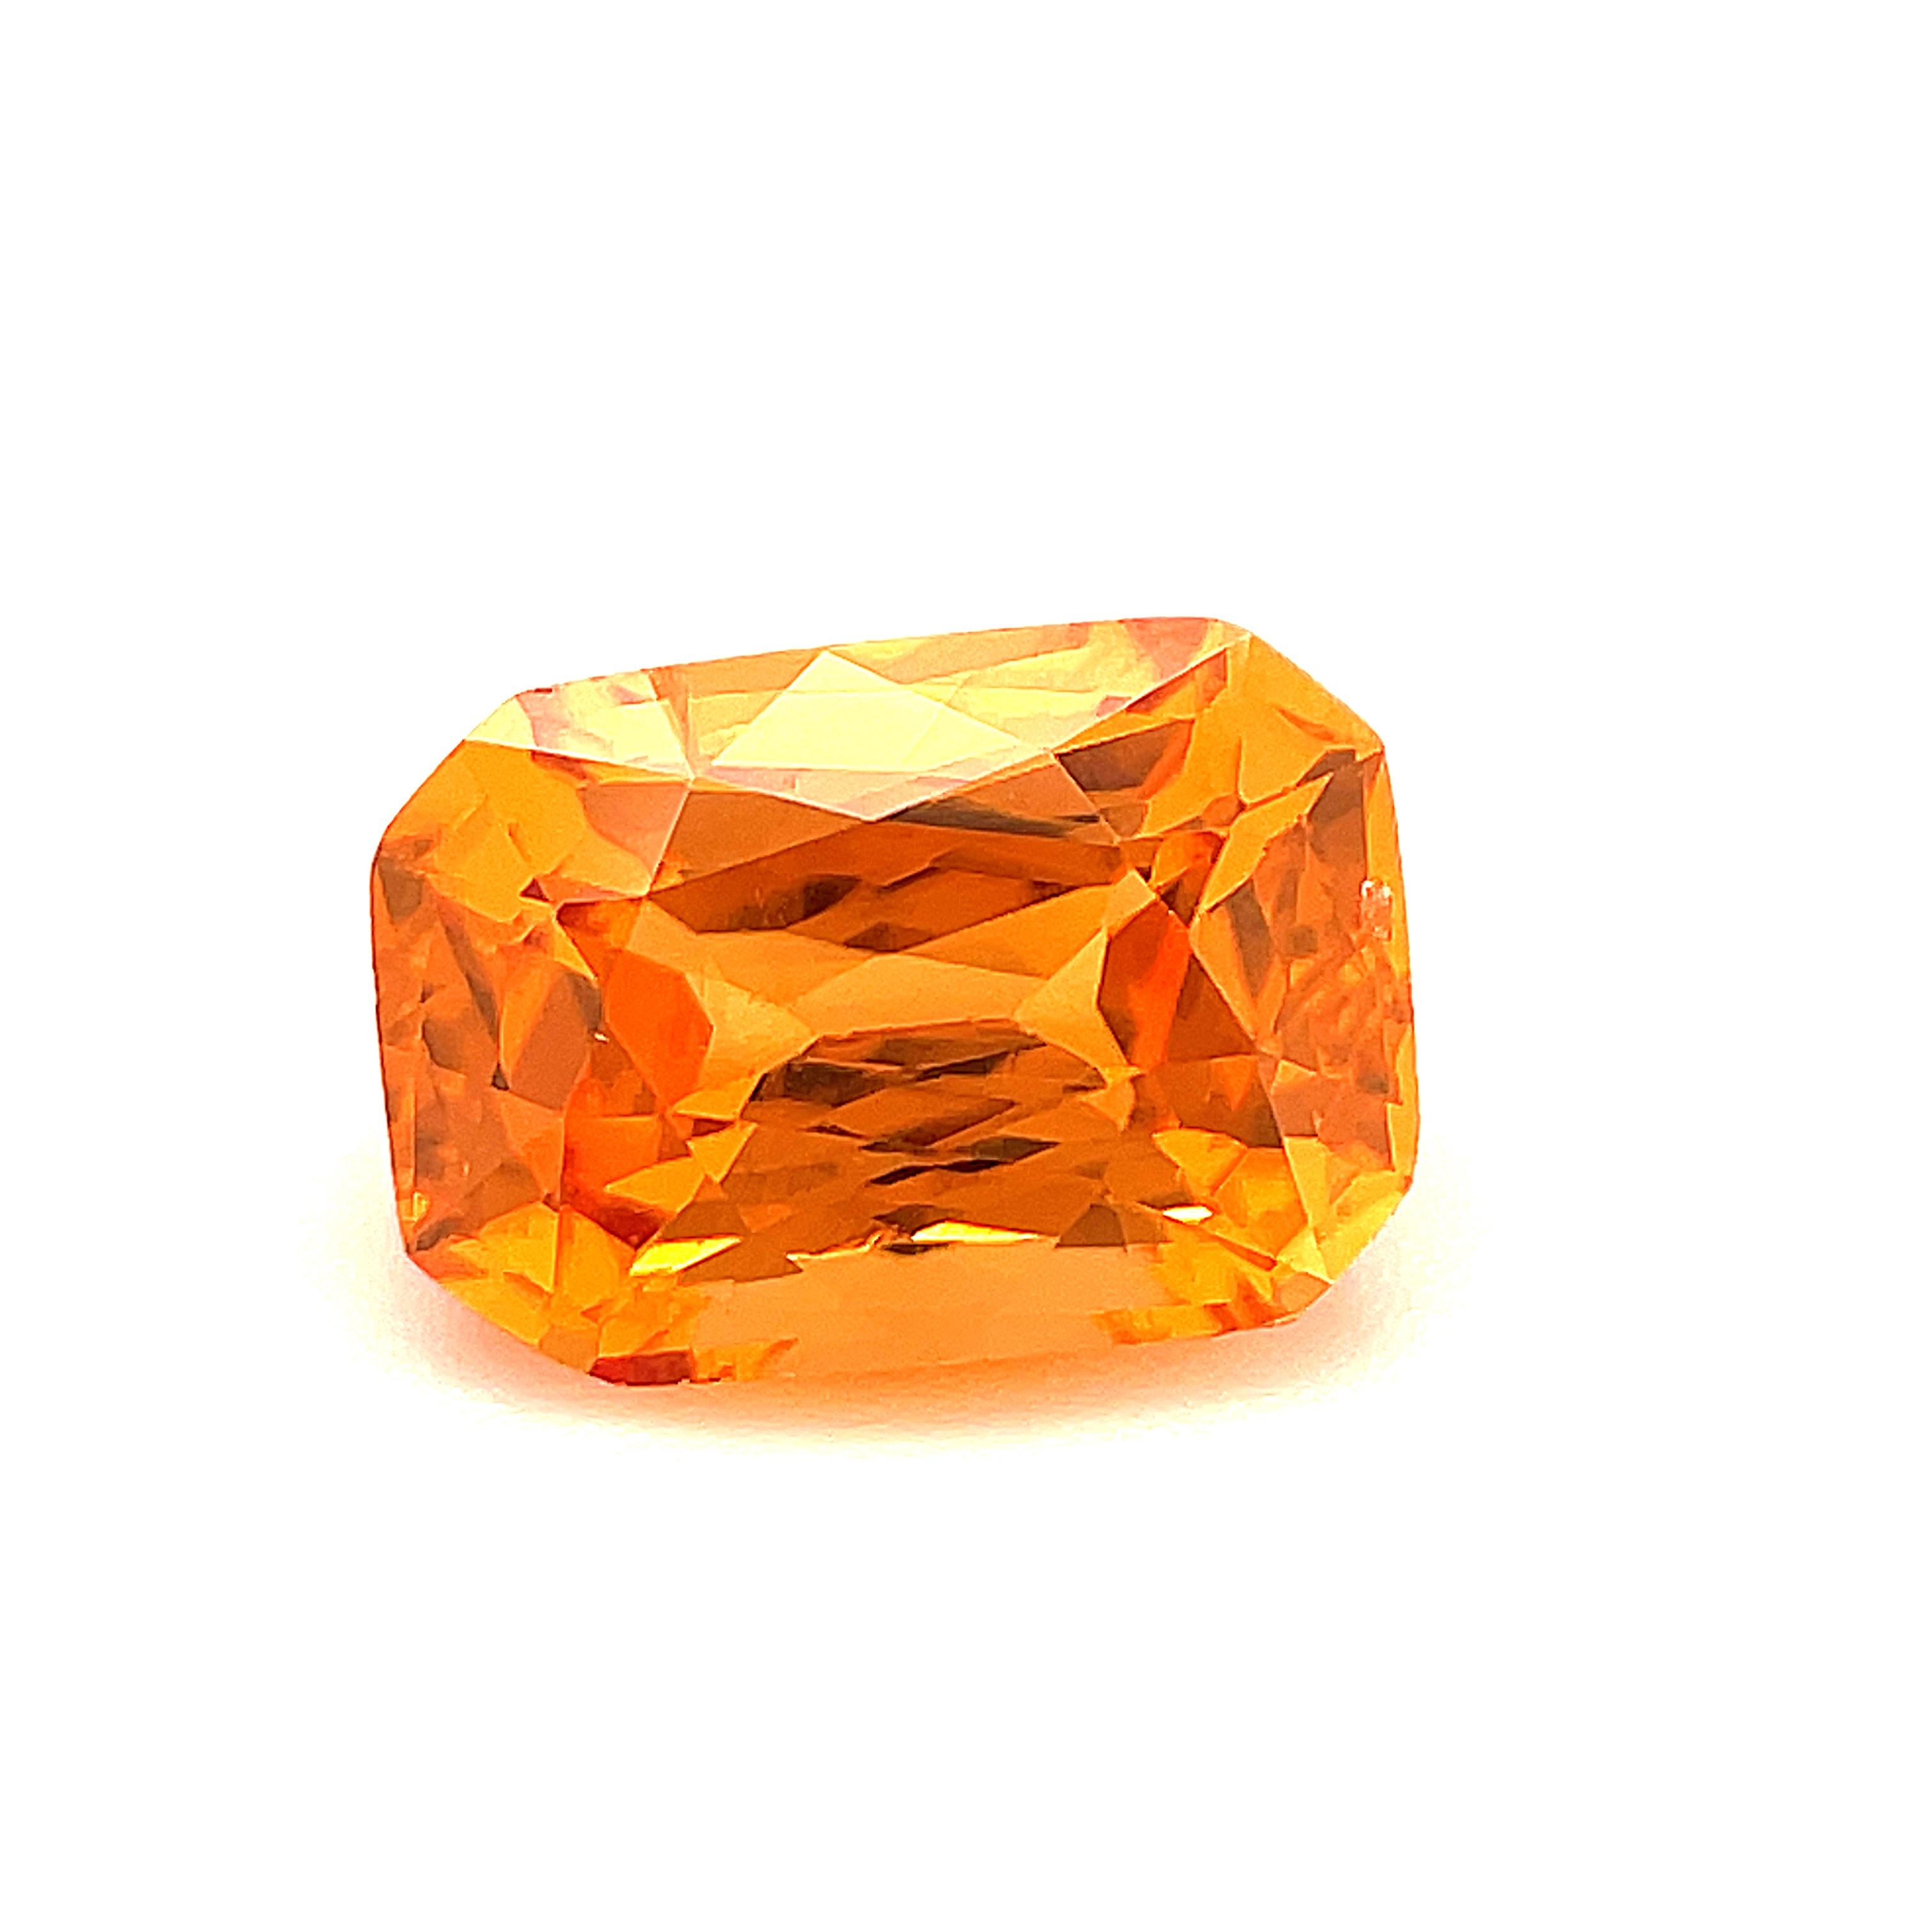 This lively orange spessartite garnet has beautiful color! The unusual modified brilliant facets and exceptional luster allow for superior light return and vibrance. This gem has a vivid, warm orange color, the color of a Mandarin orange or 